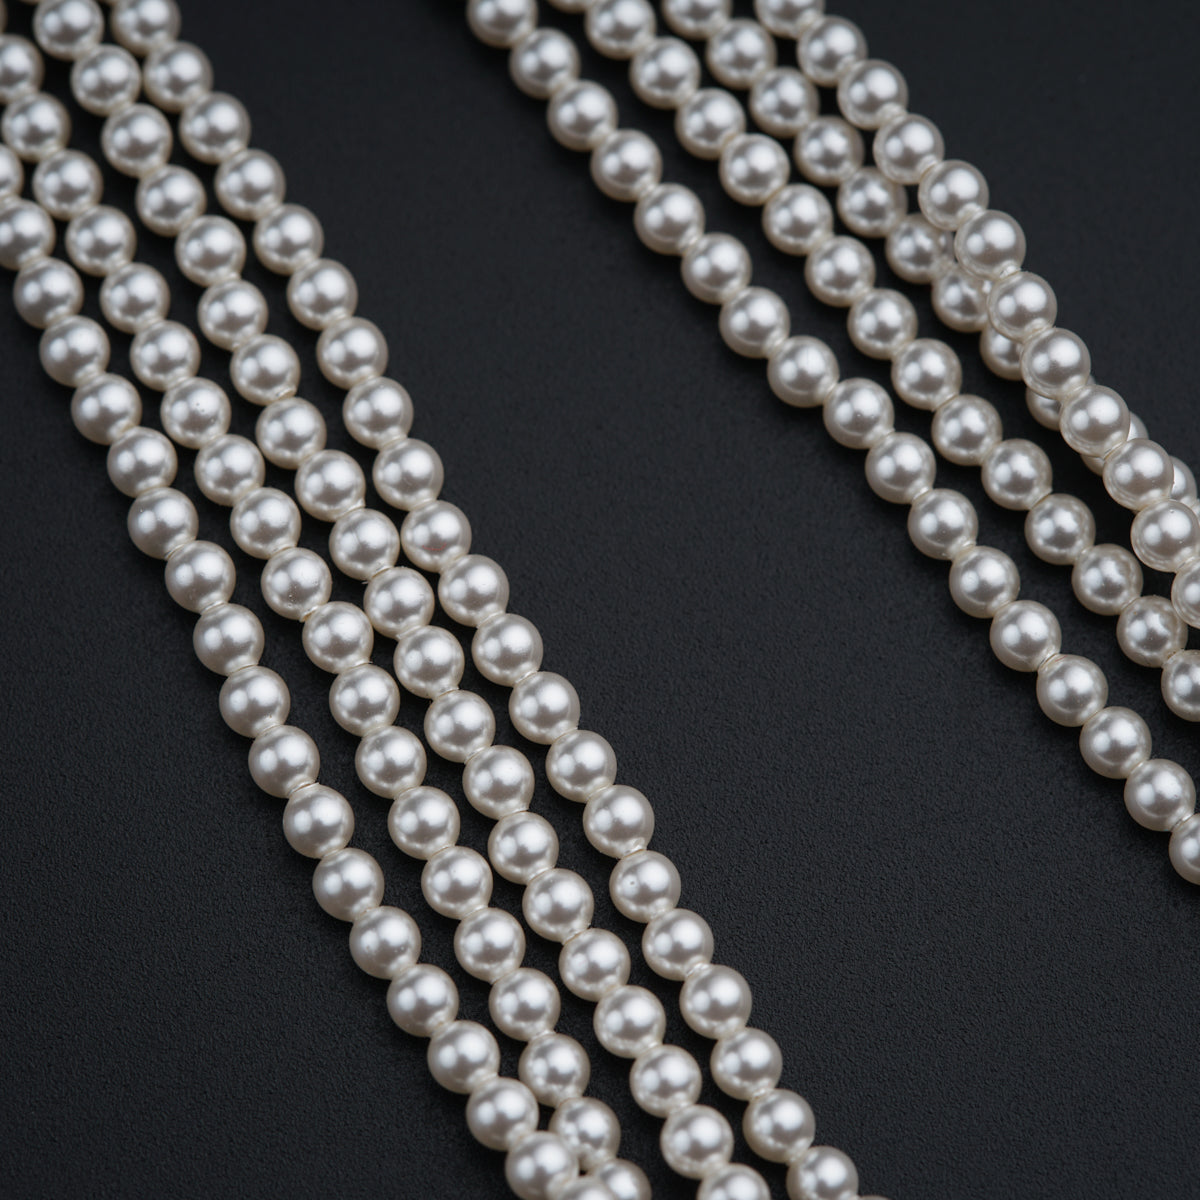 Classic Tanmani Set with High Quality Pearls